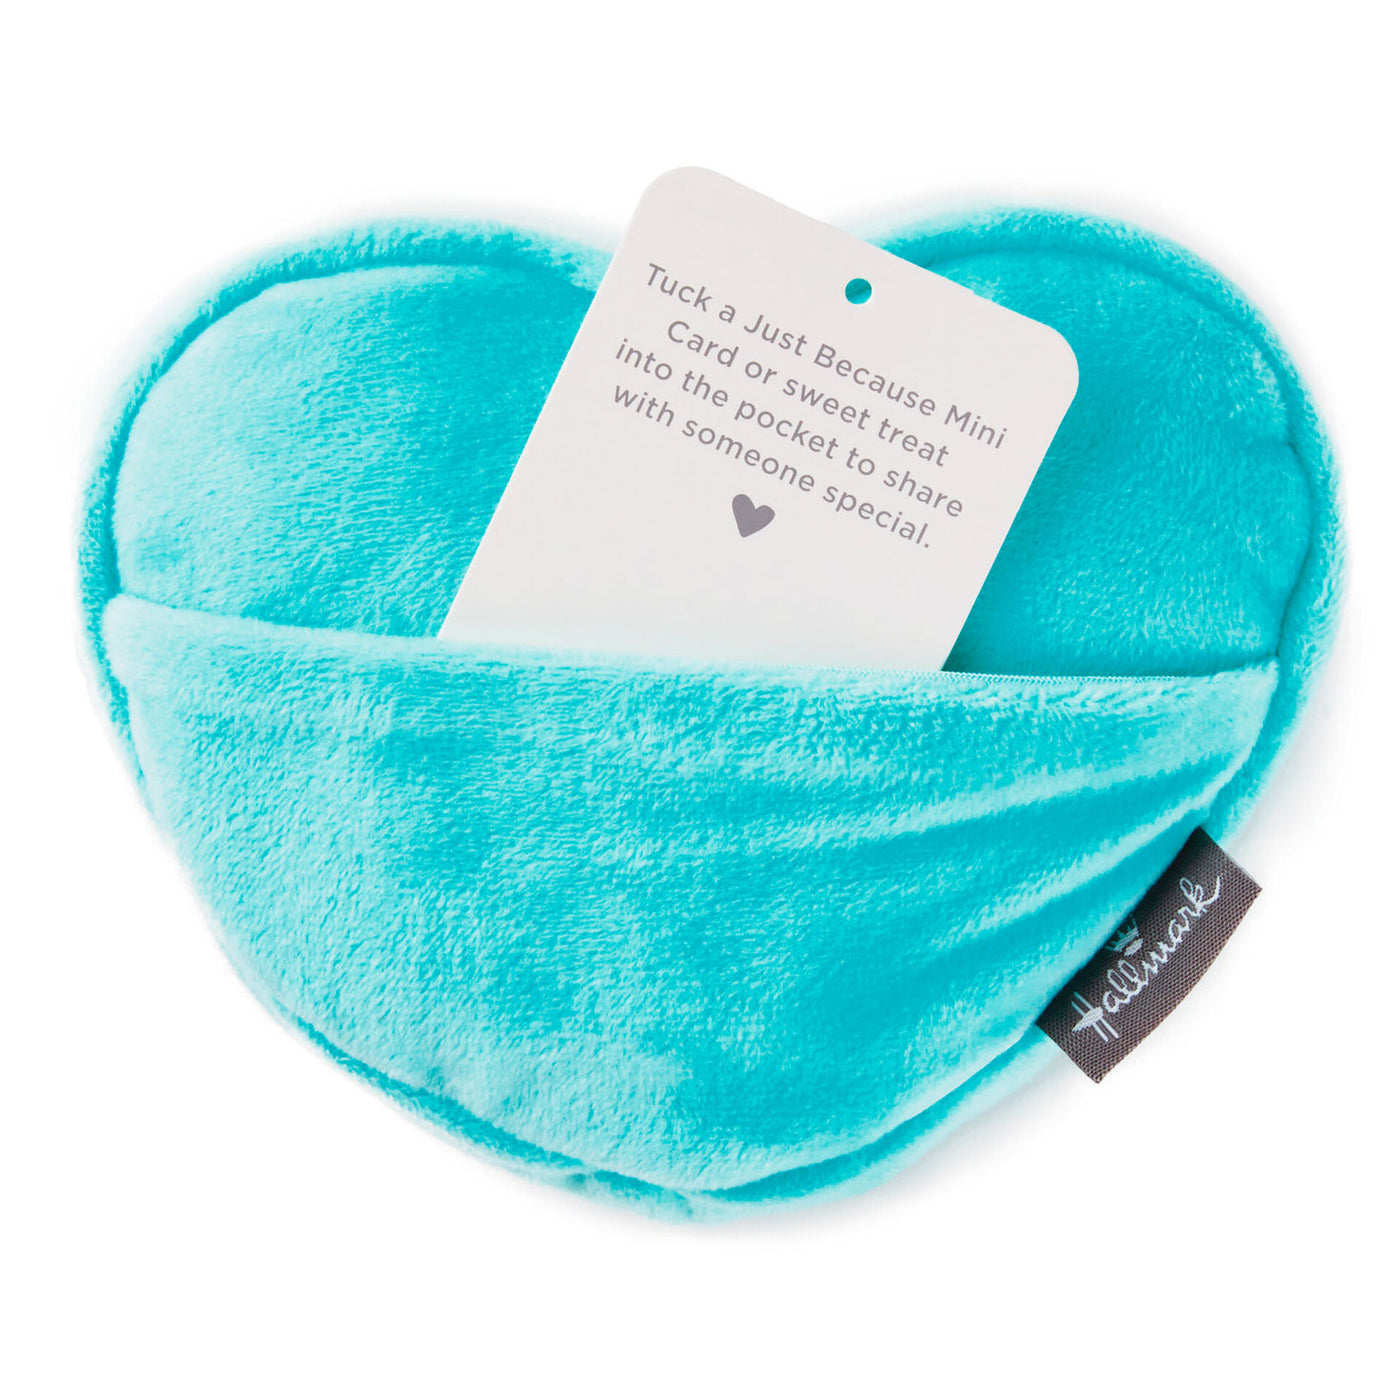 Hallmark Valentine Love XOXO Candy Heart Blue Plush With Pocket New with Tag